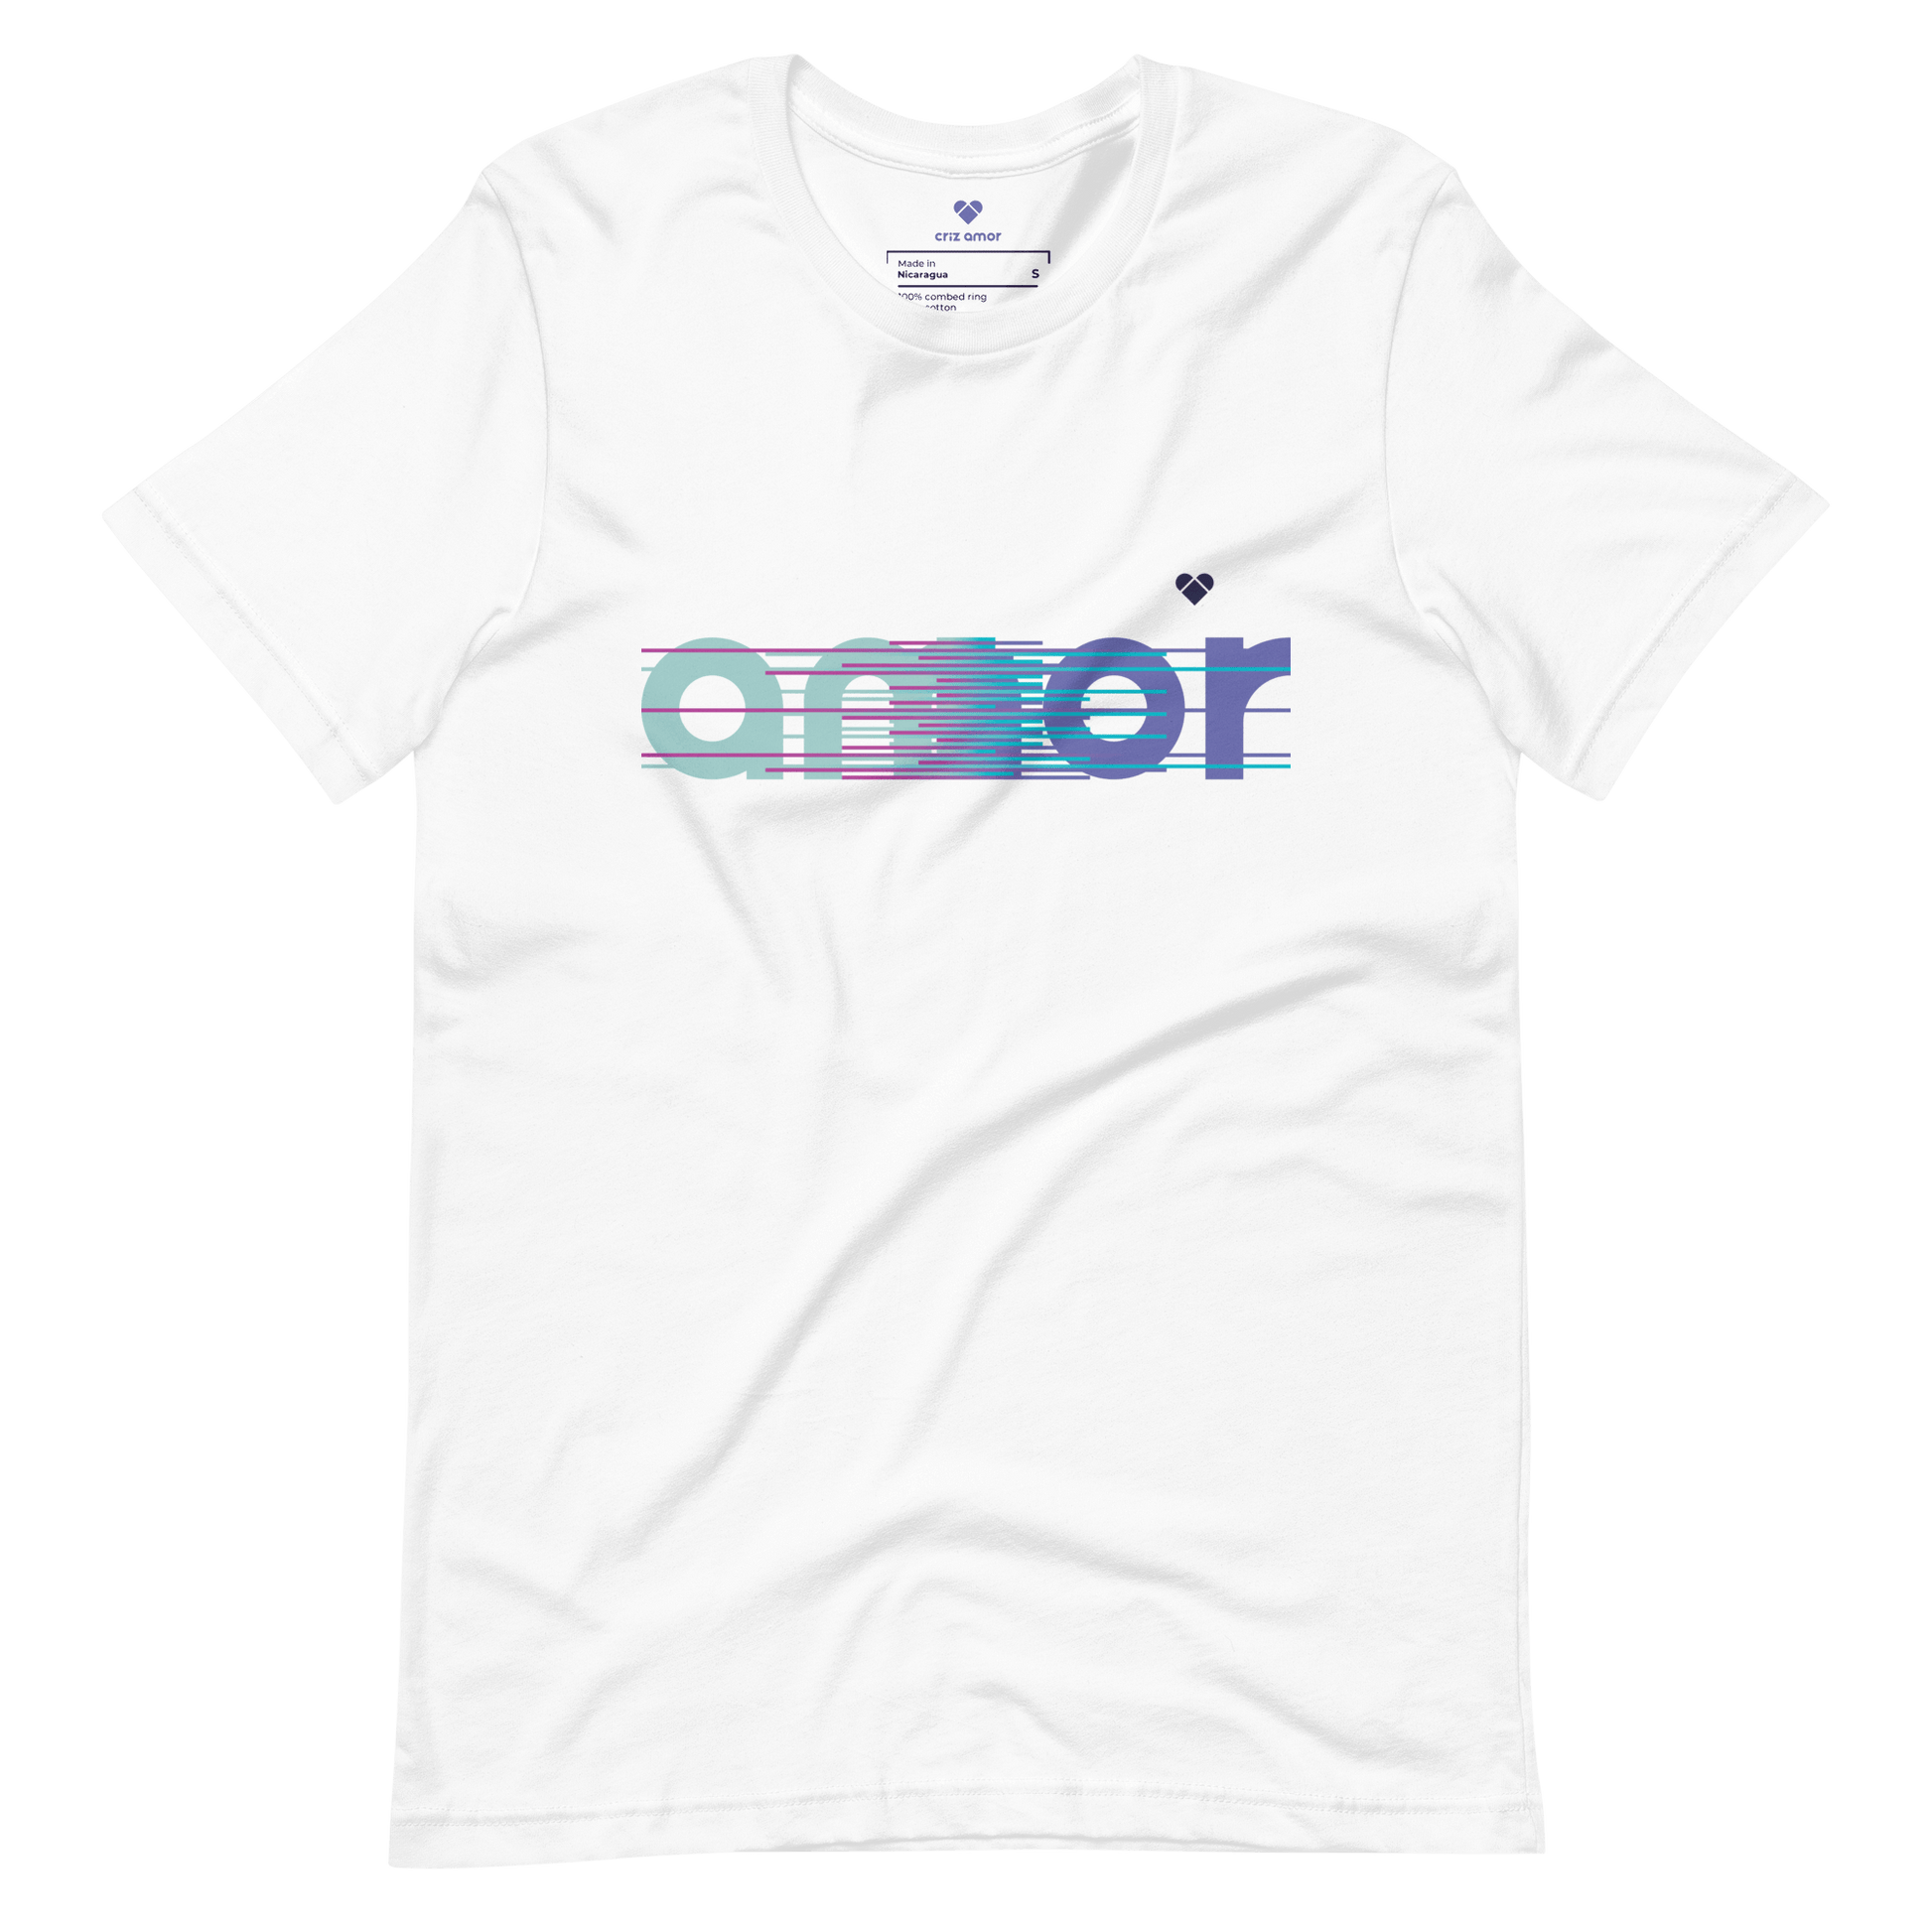 White Tee with gradient and stripes - CRiZ AMOR's Capsule Collection